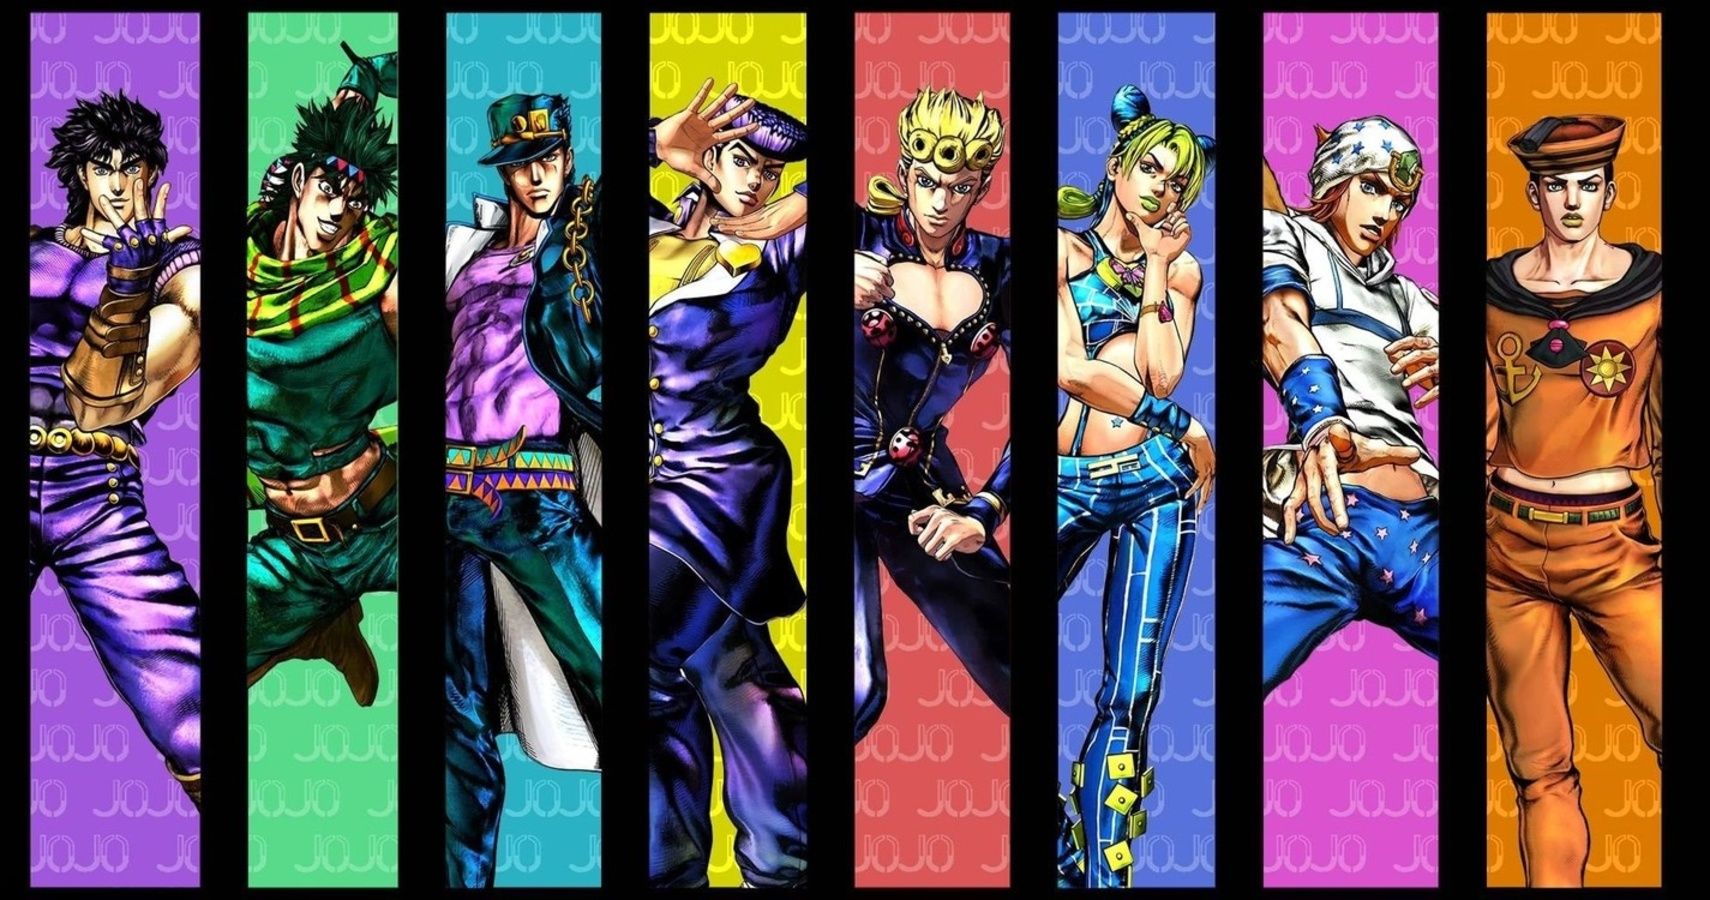 Jojos Bizarre Adventure Every Part Ranked Edm Bangers And Fresh Anime Electricbounce 8451